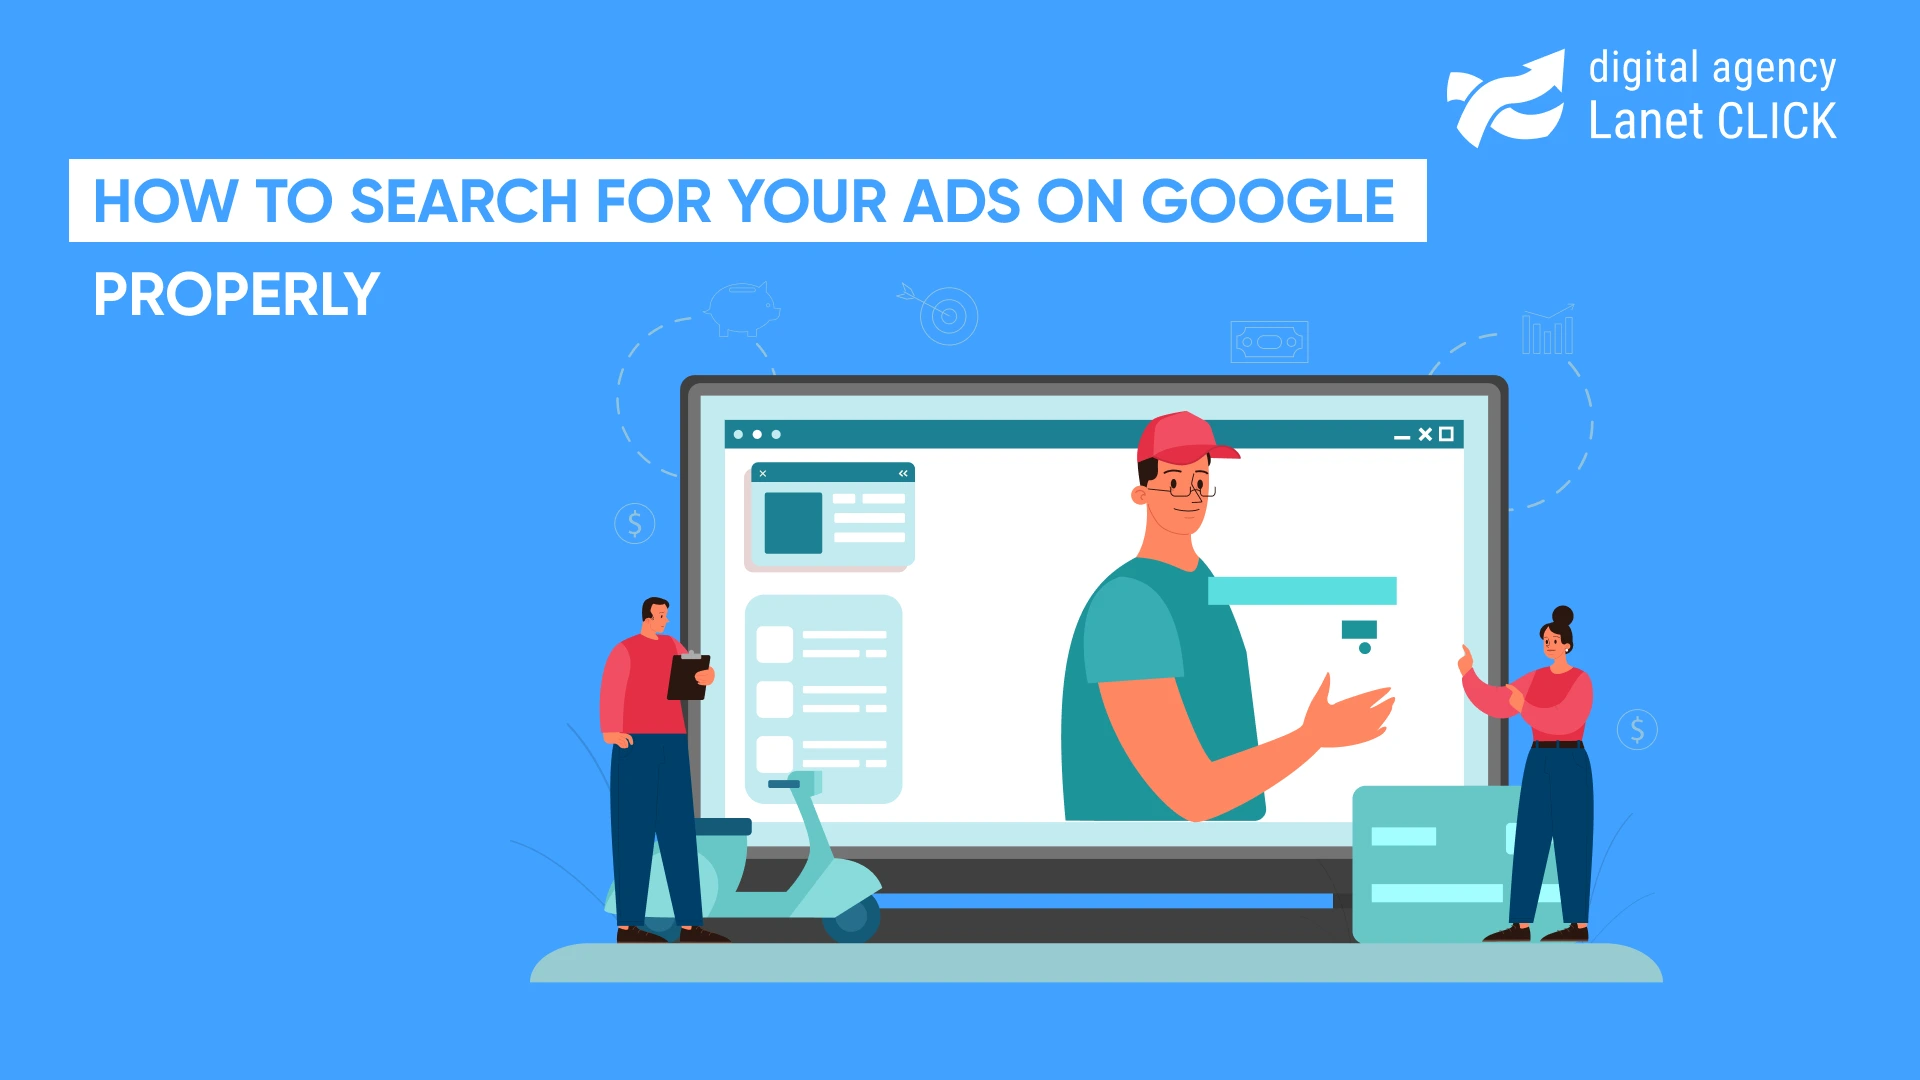 How to search for your ads on Google properly